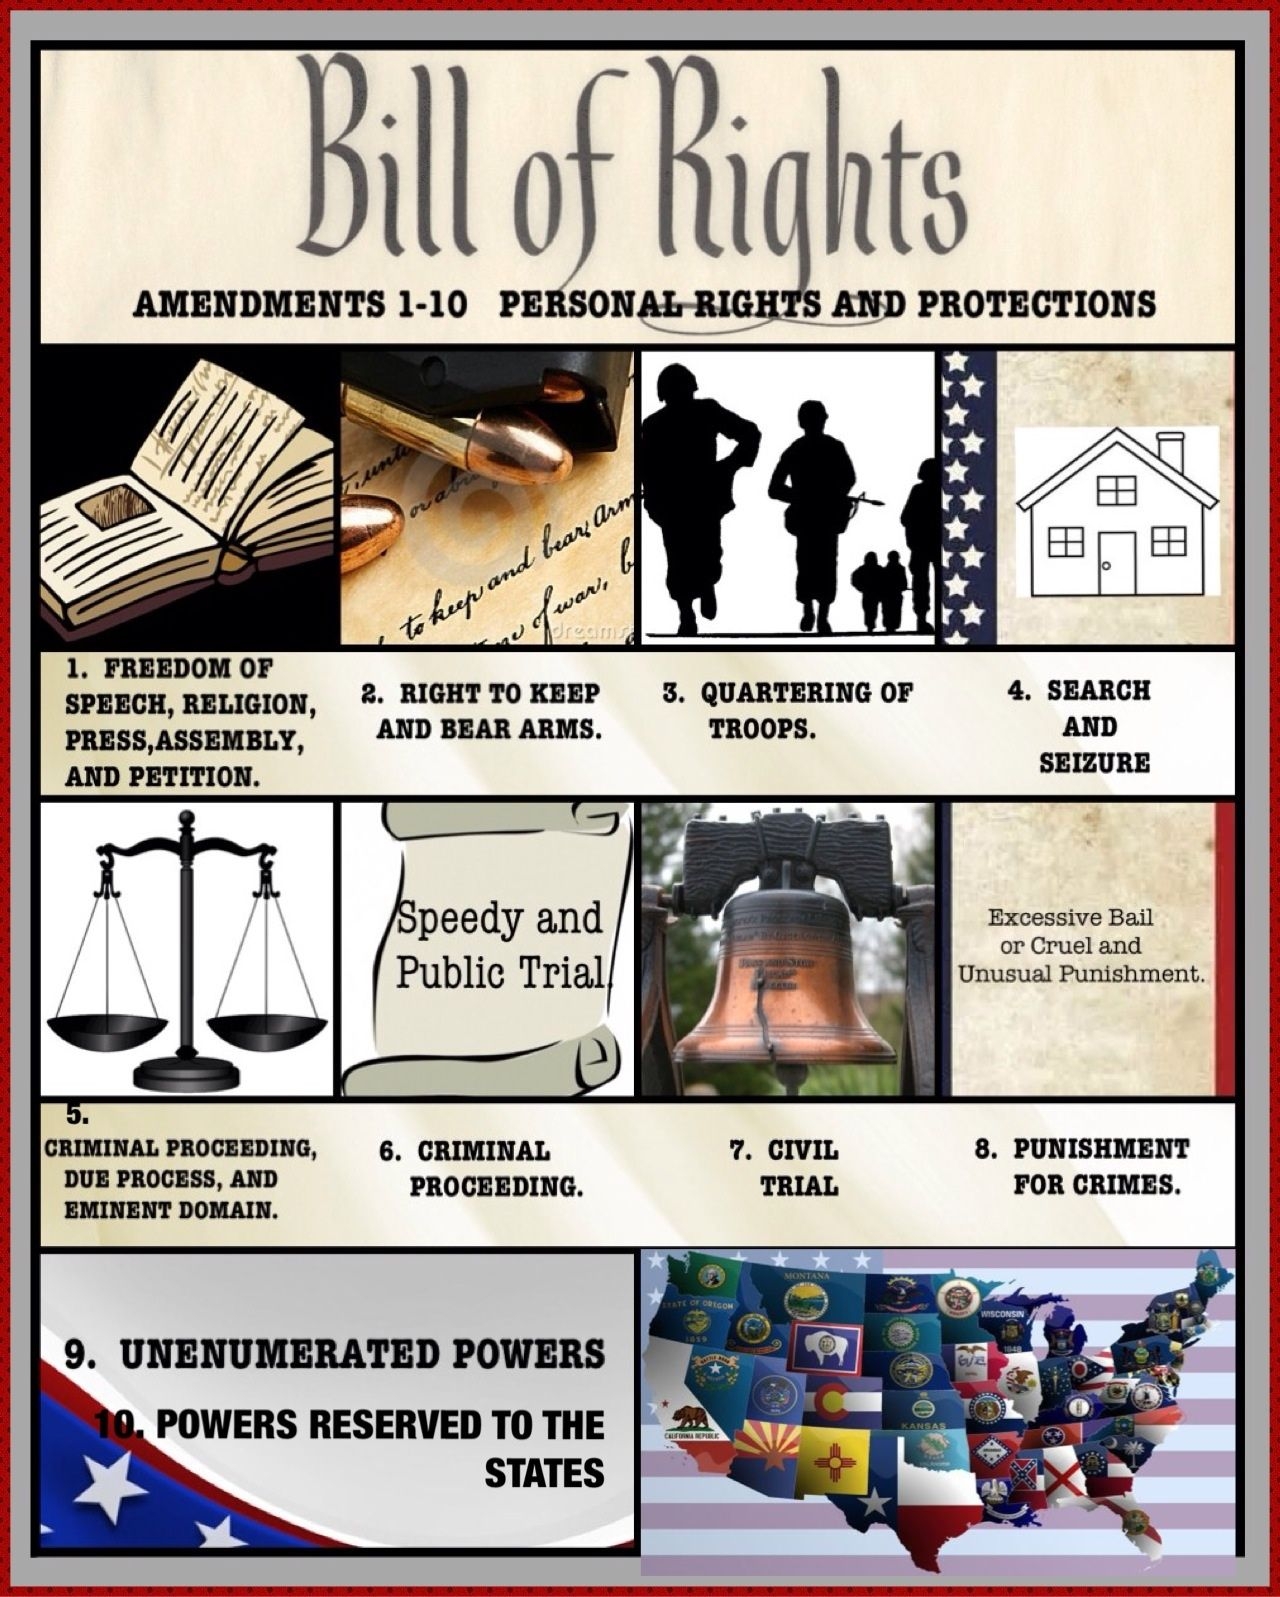 8-images-bill-of-rights-amendments-1-10-for-kids-and-review-alqu-blog